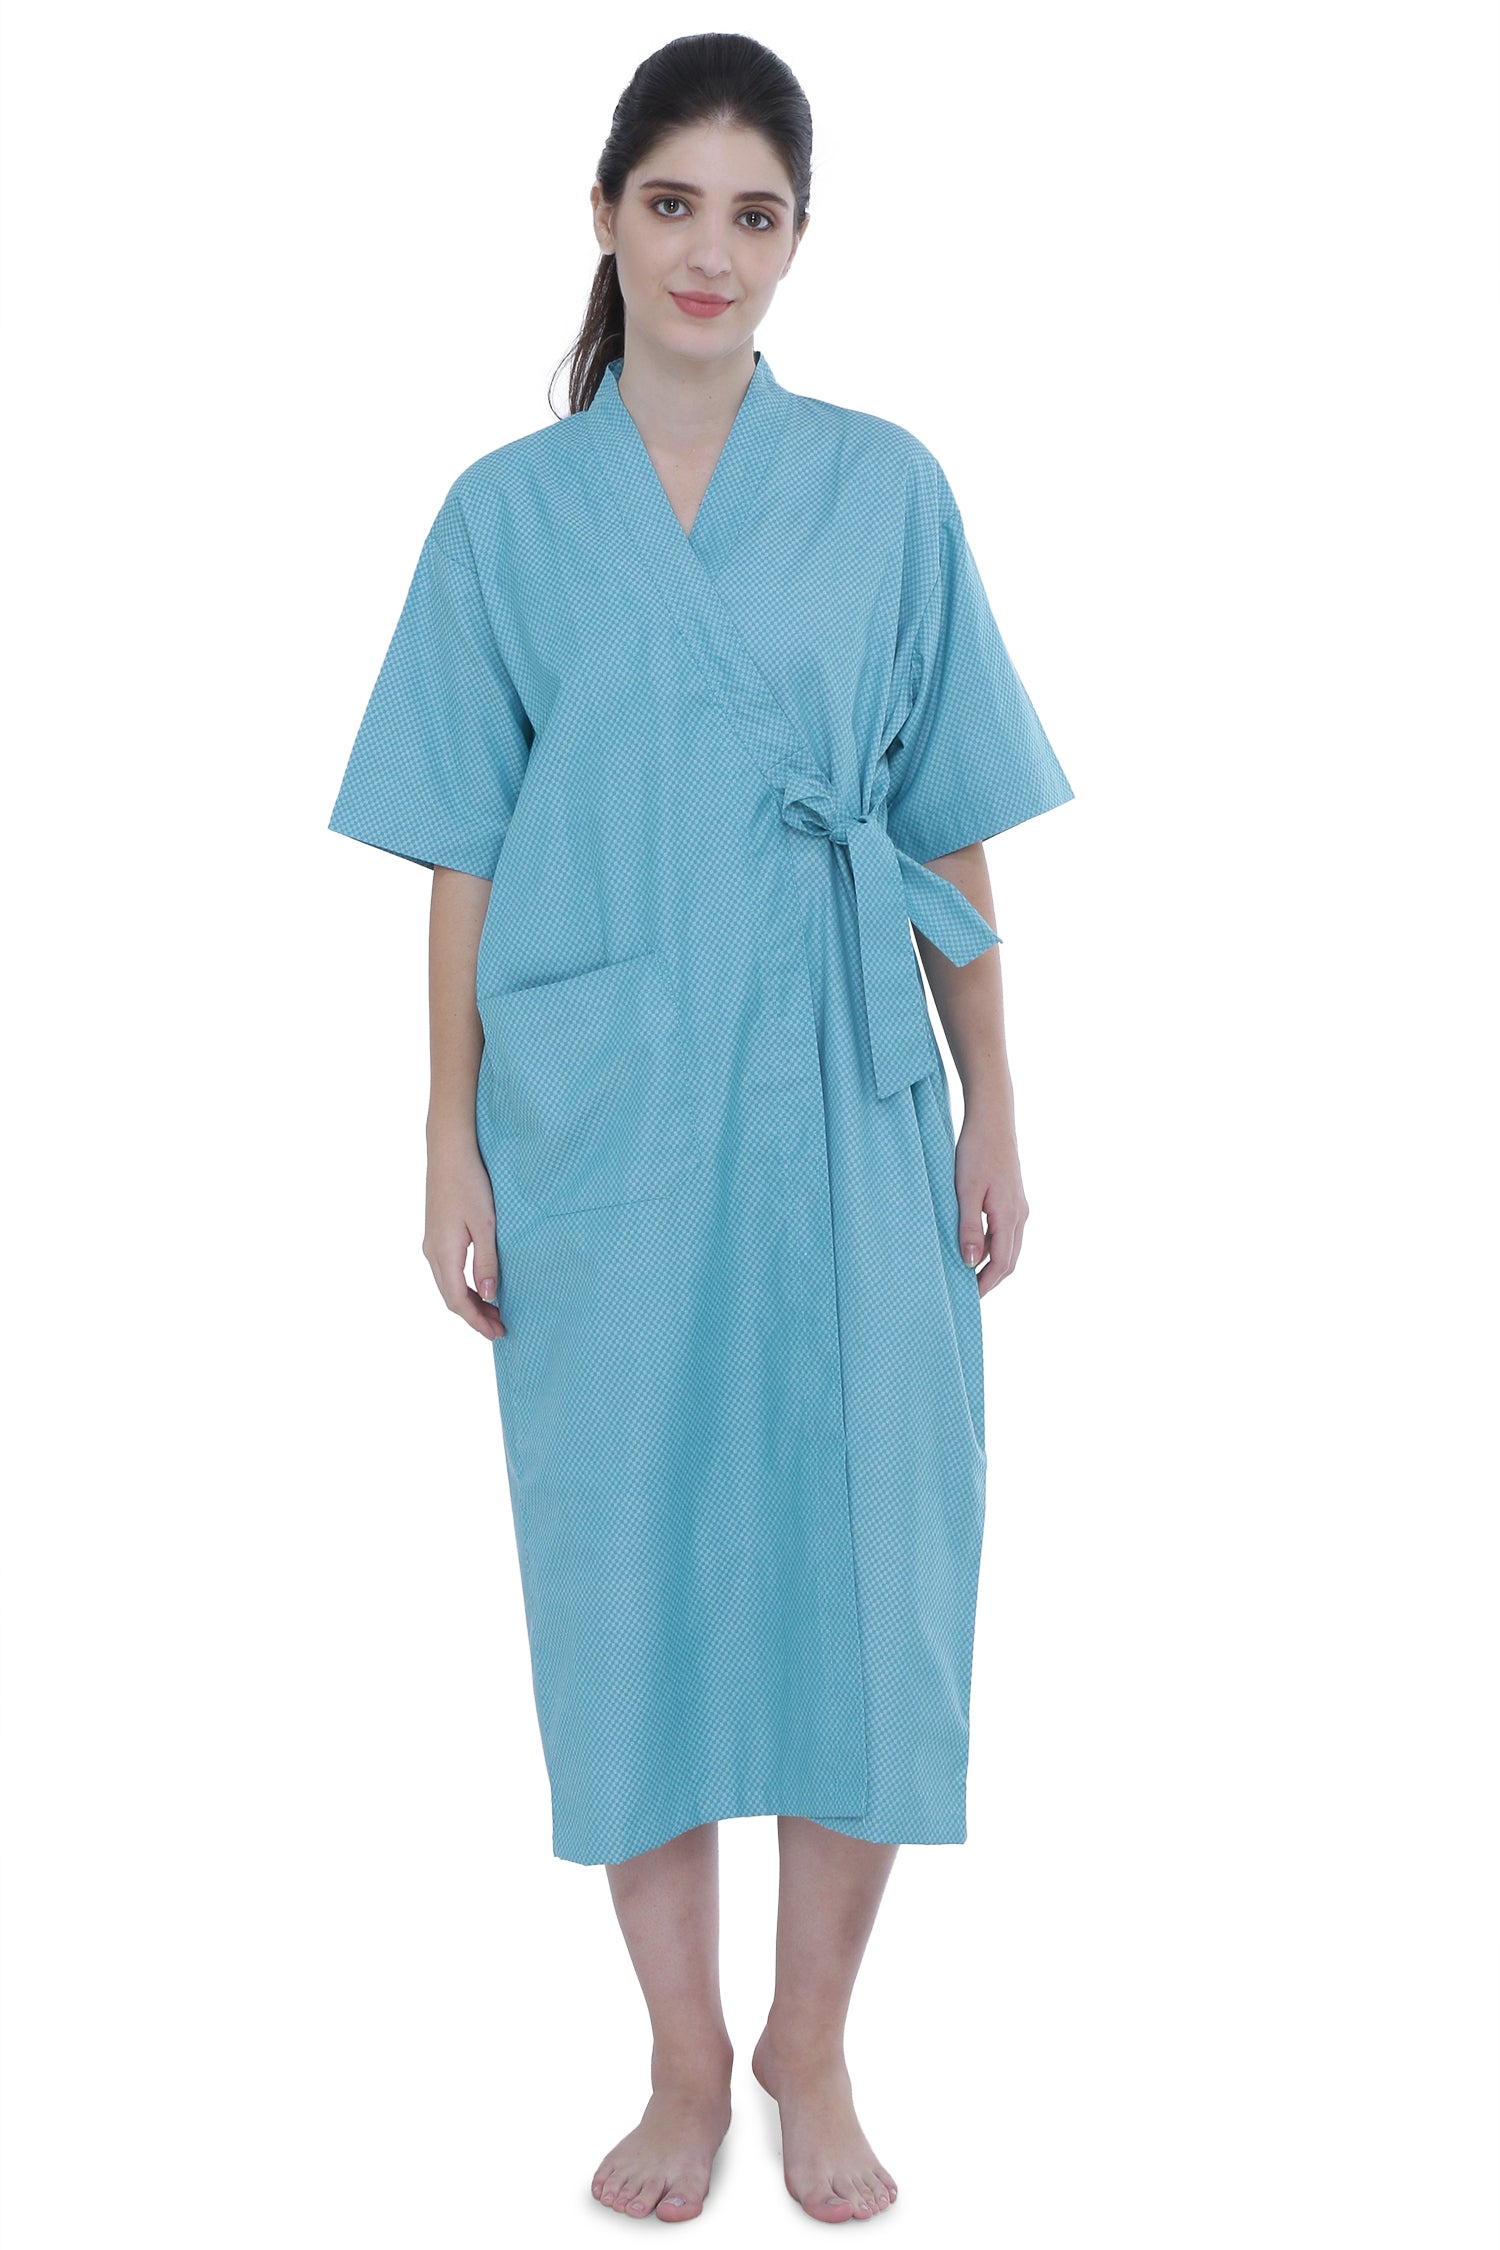 Hospital Gown with Back Tie